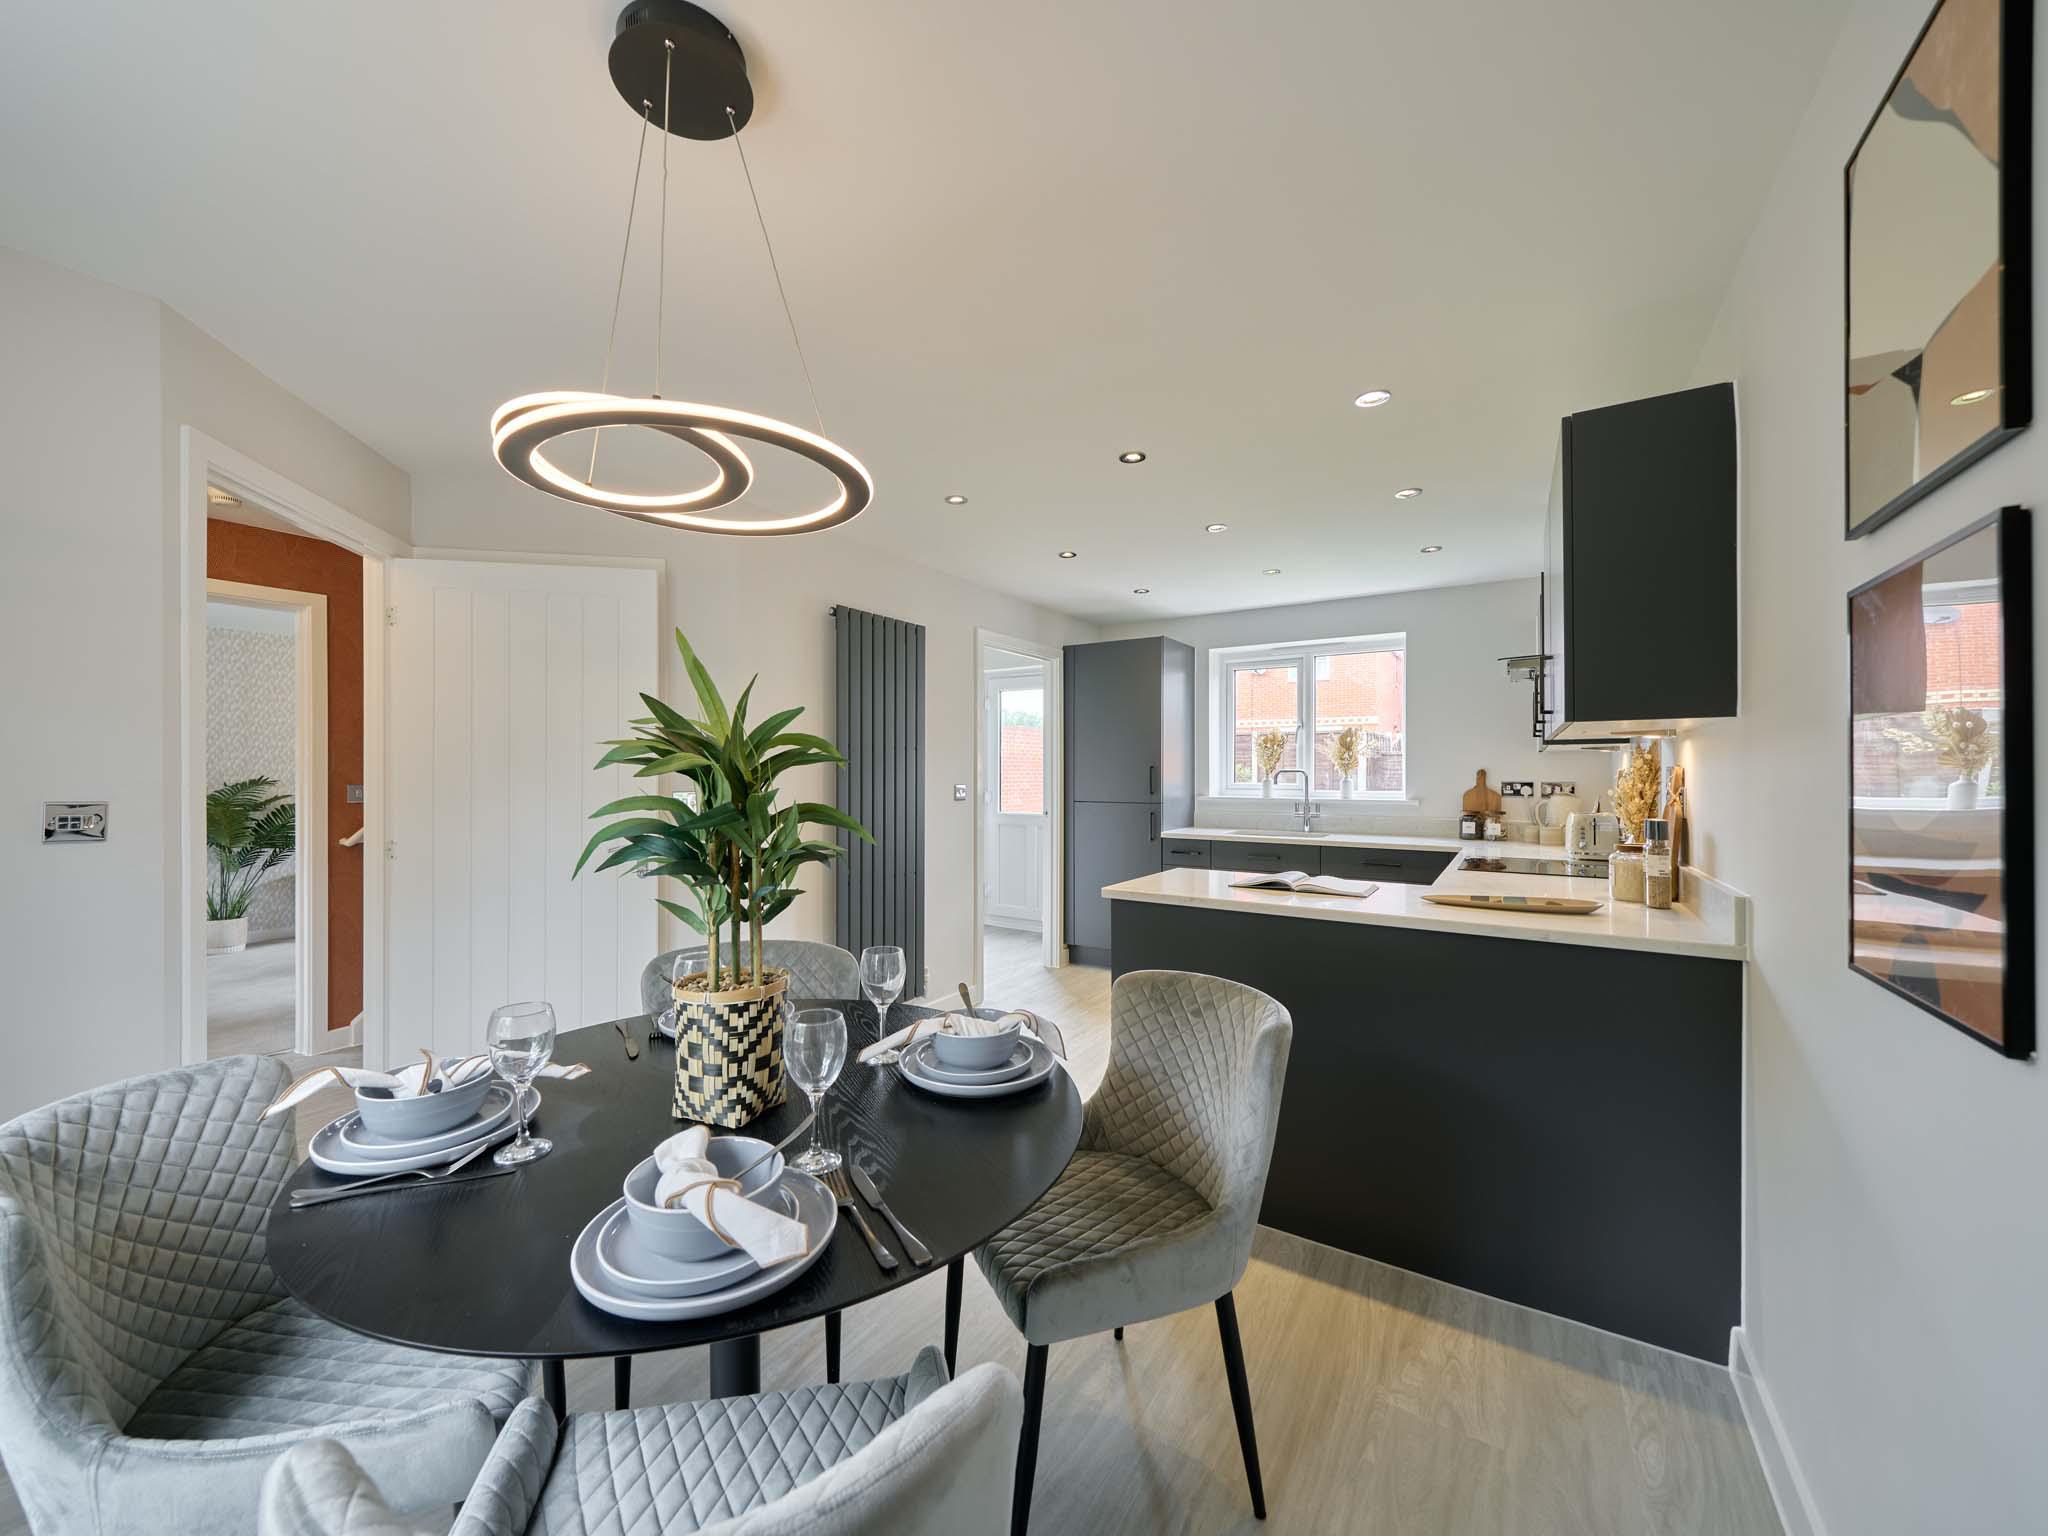 Images Persimmon Homes Boyton Place